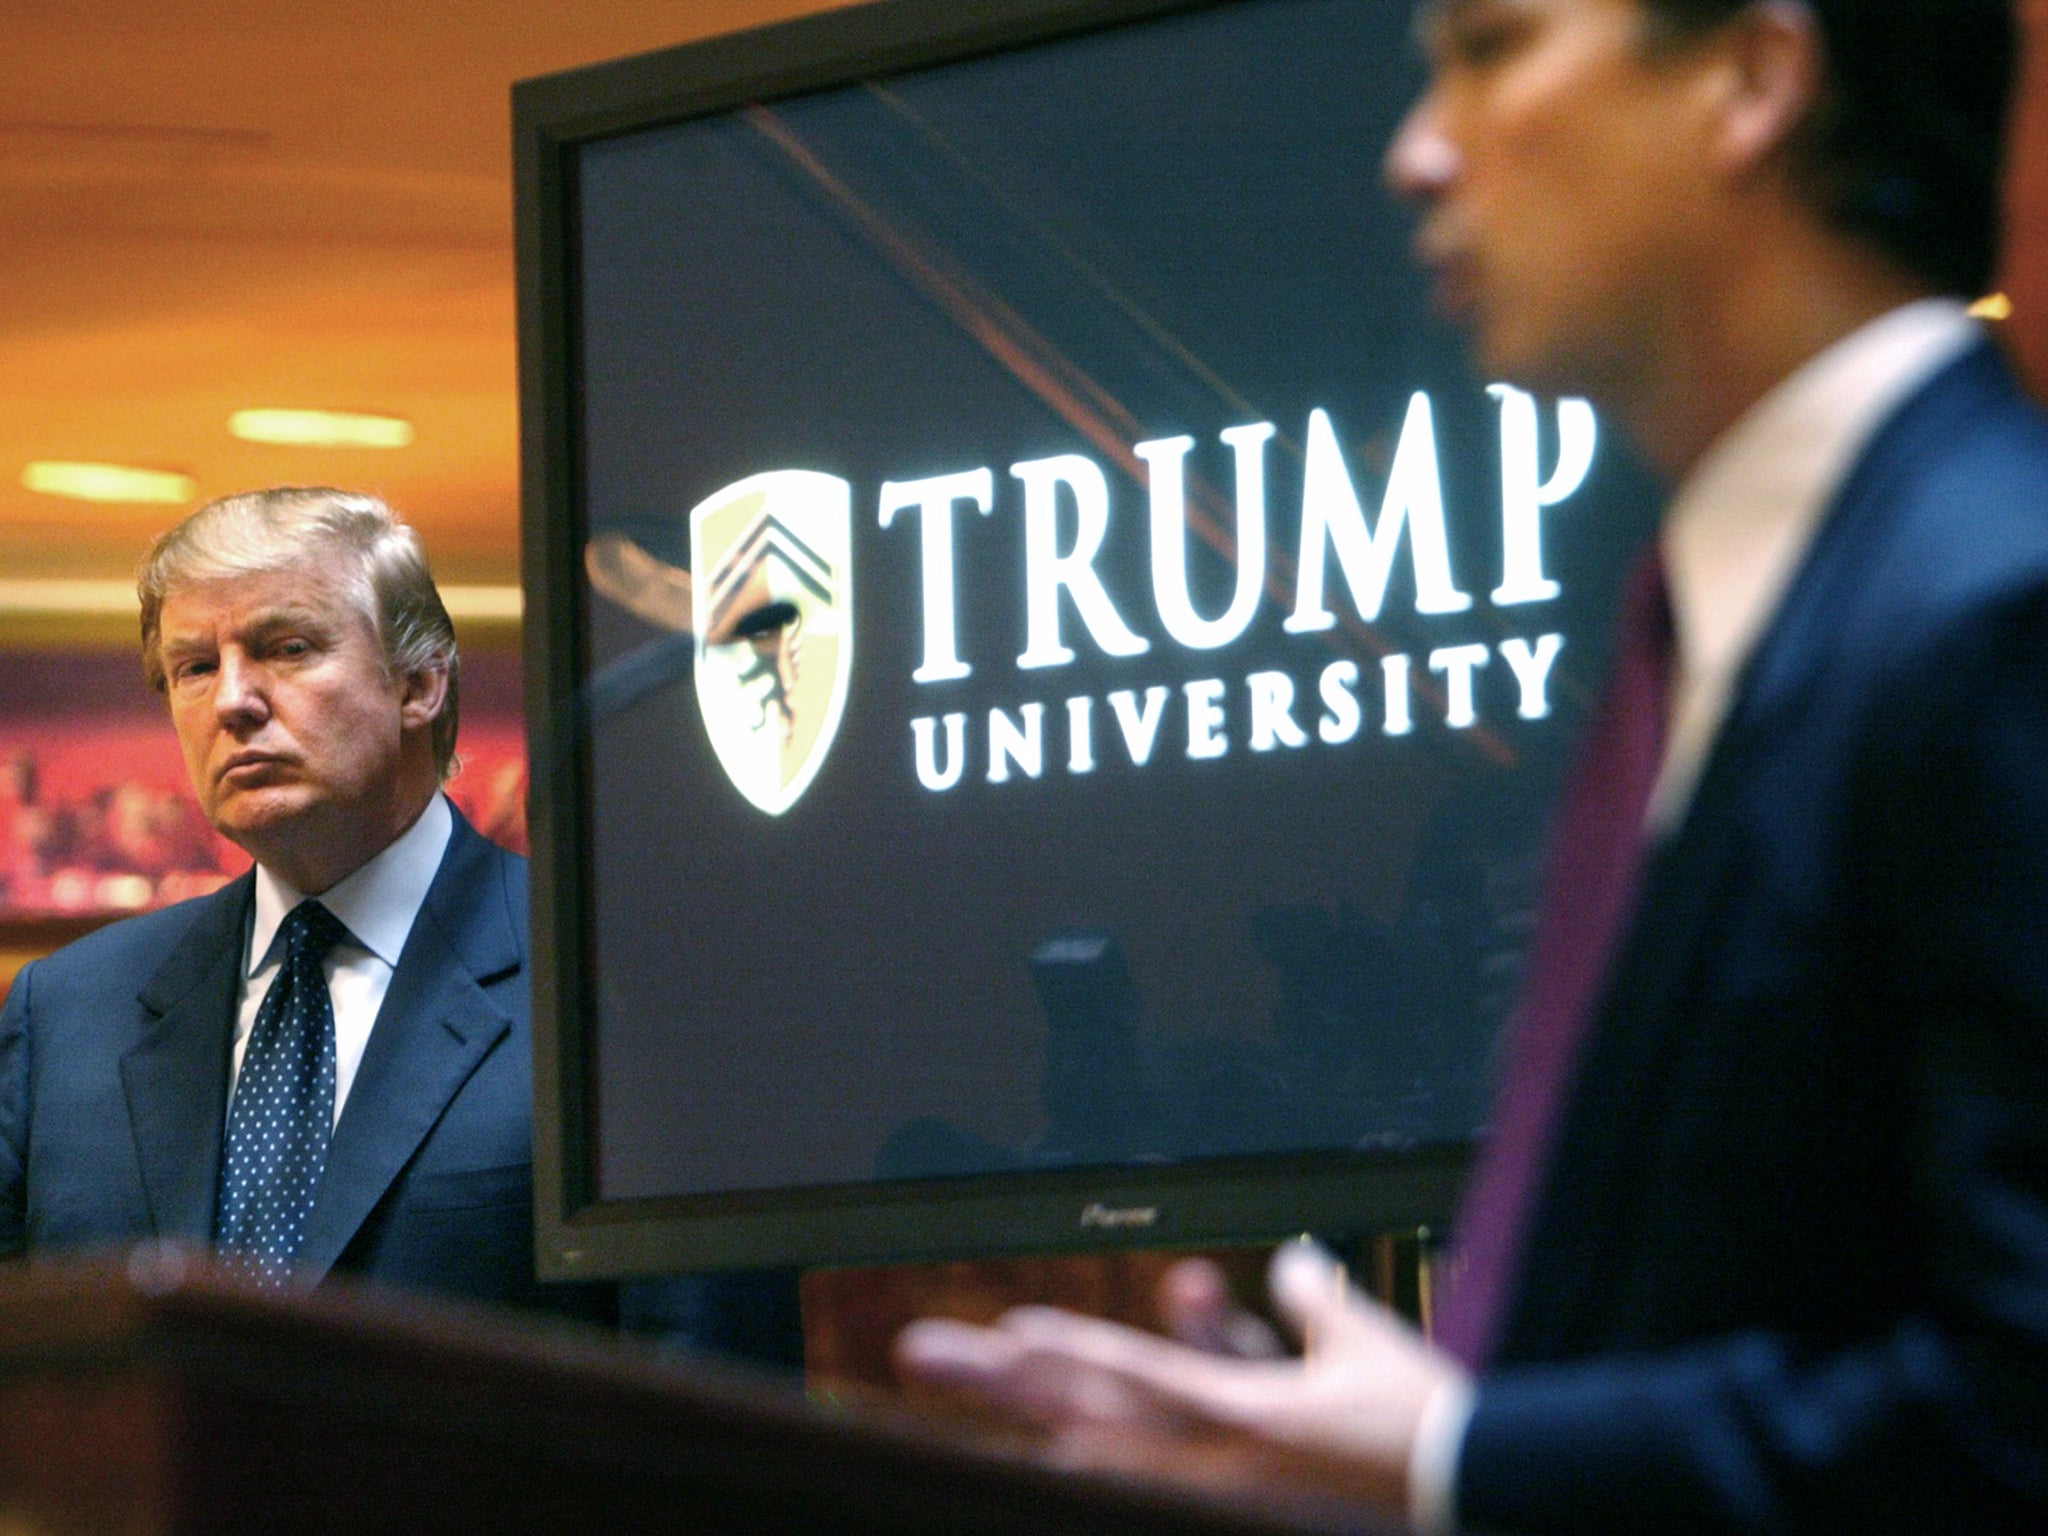 Trump University has been accused of draining students financially